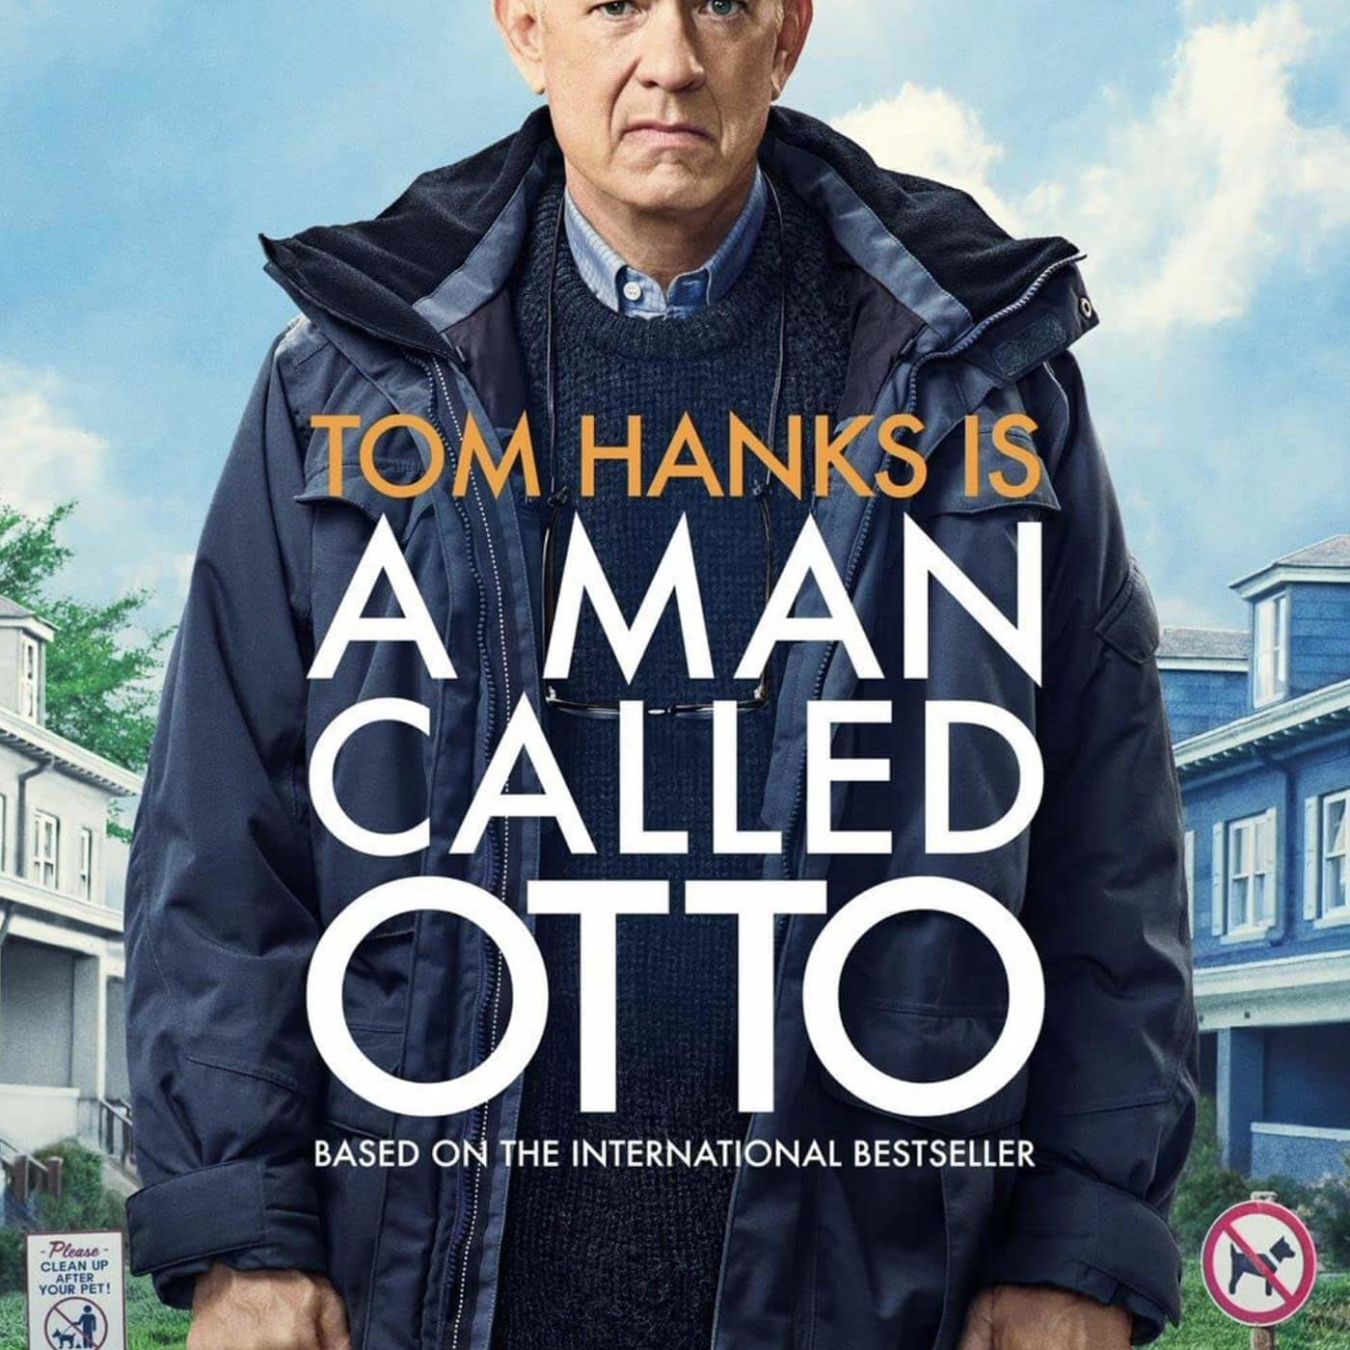 Film Poster for A Man Called Otto with Tom Hanks standing looking grumpy